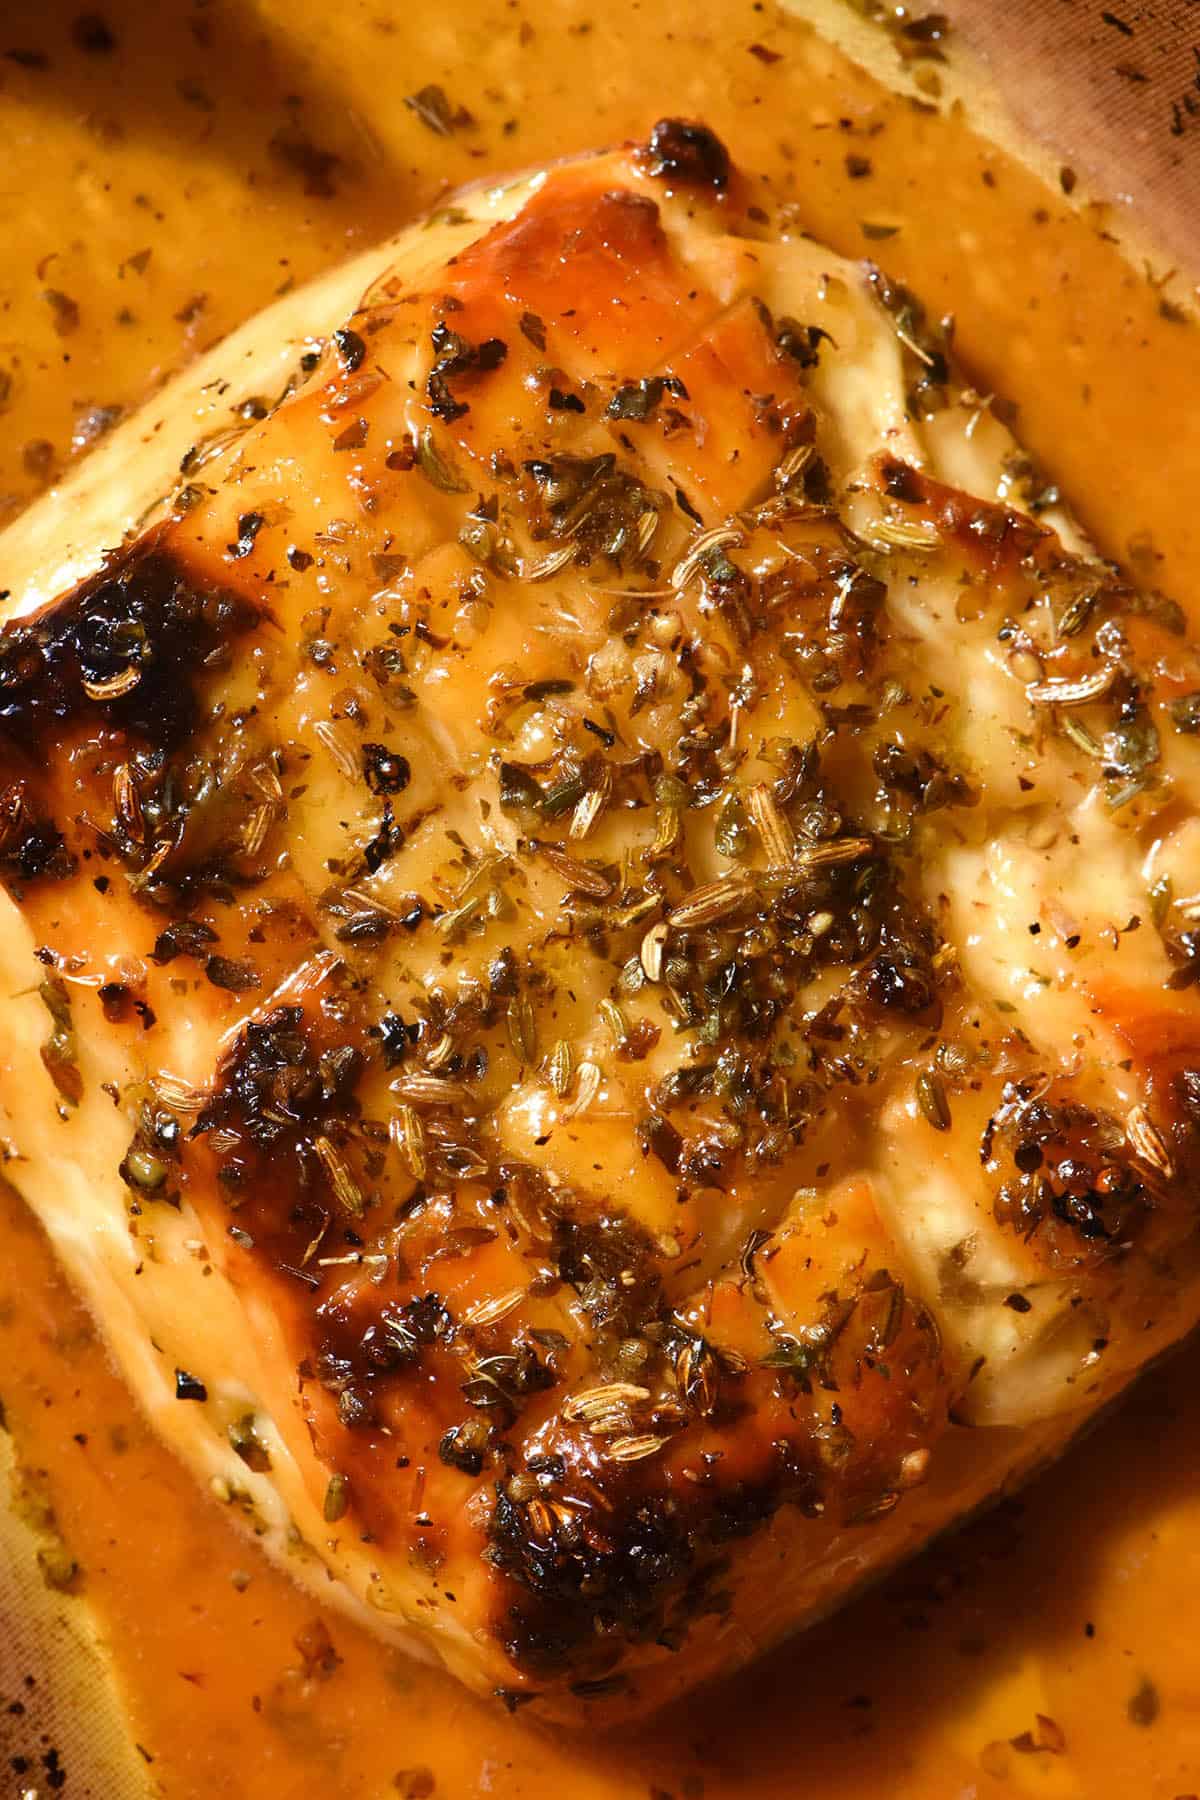 An aerial macro image of a slab of golden brown baked halloumi. The halloumi has been scored and is smothered in a maple lemon glaze. It is topped with dried oregano and fennel seeds. 